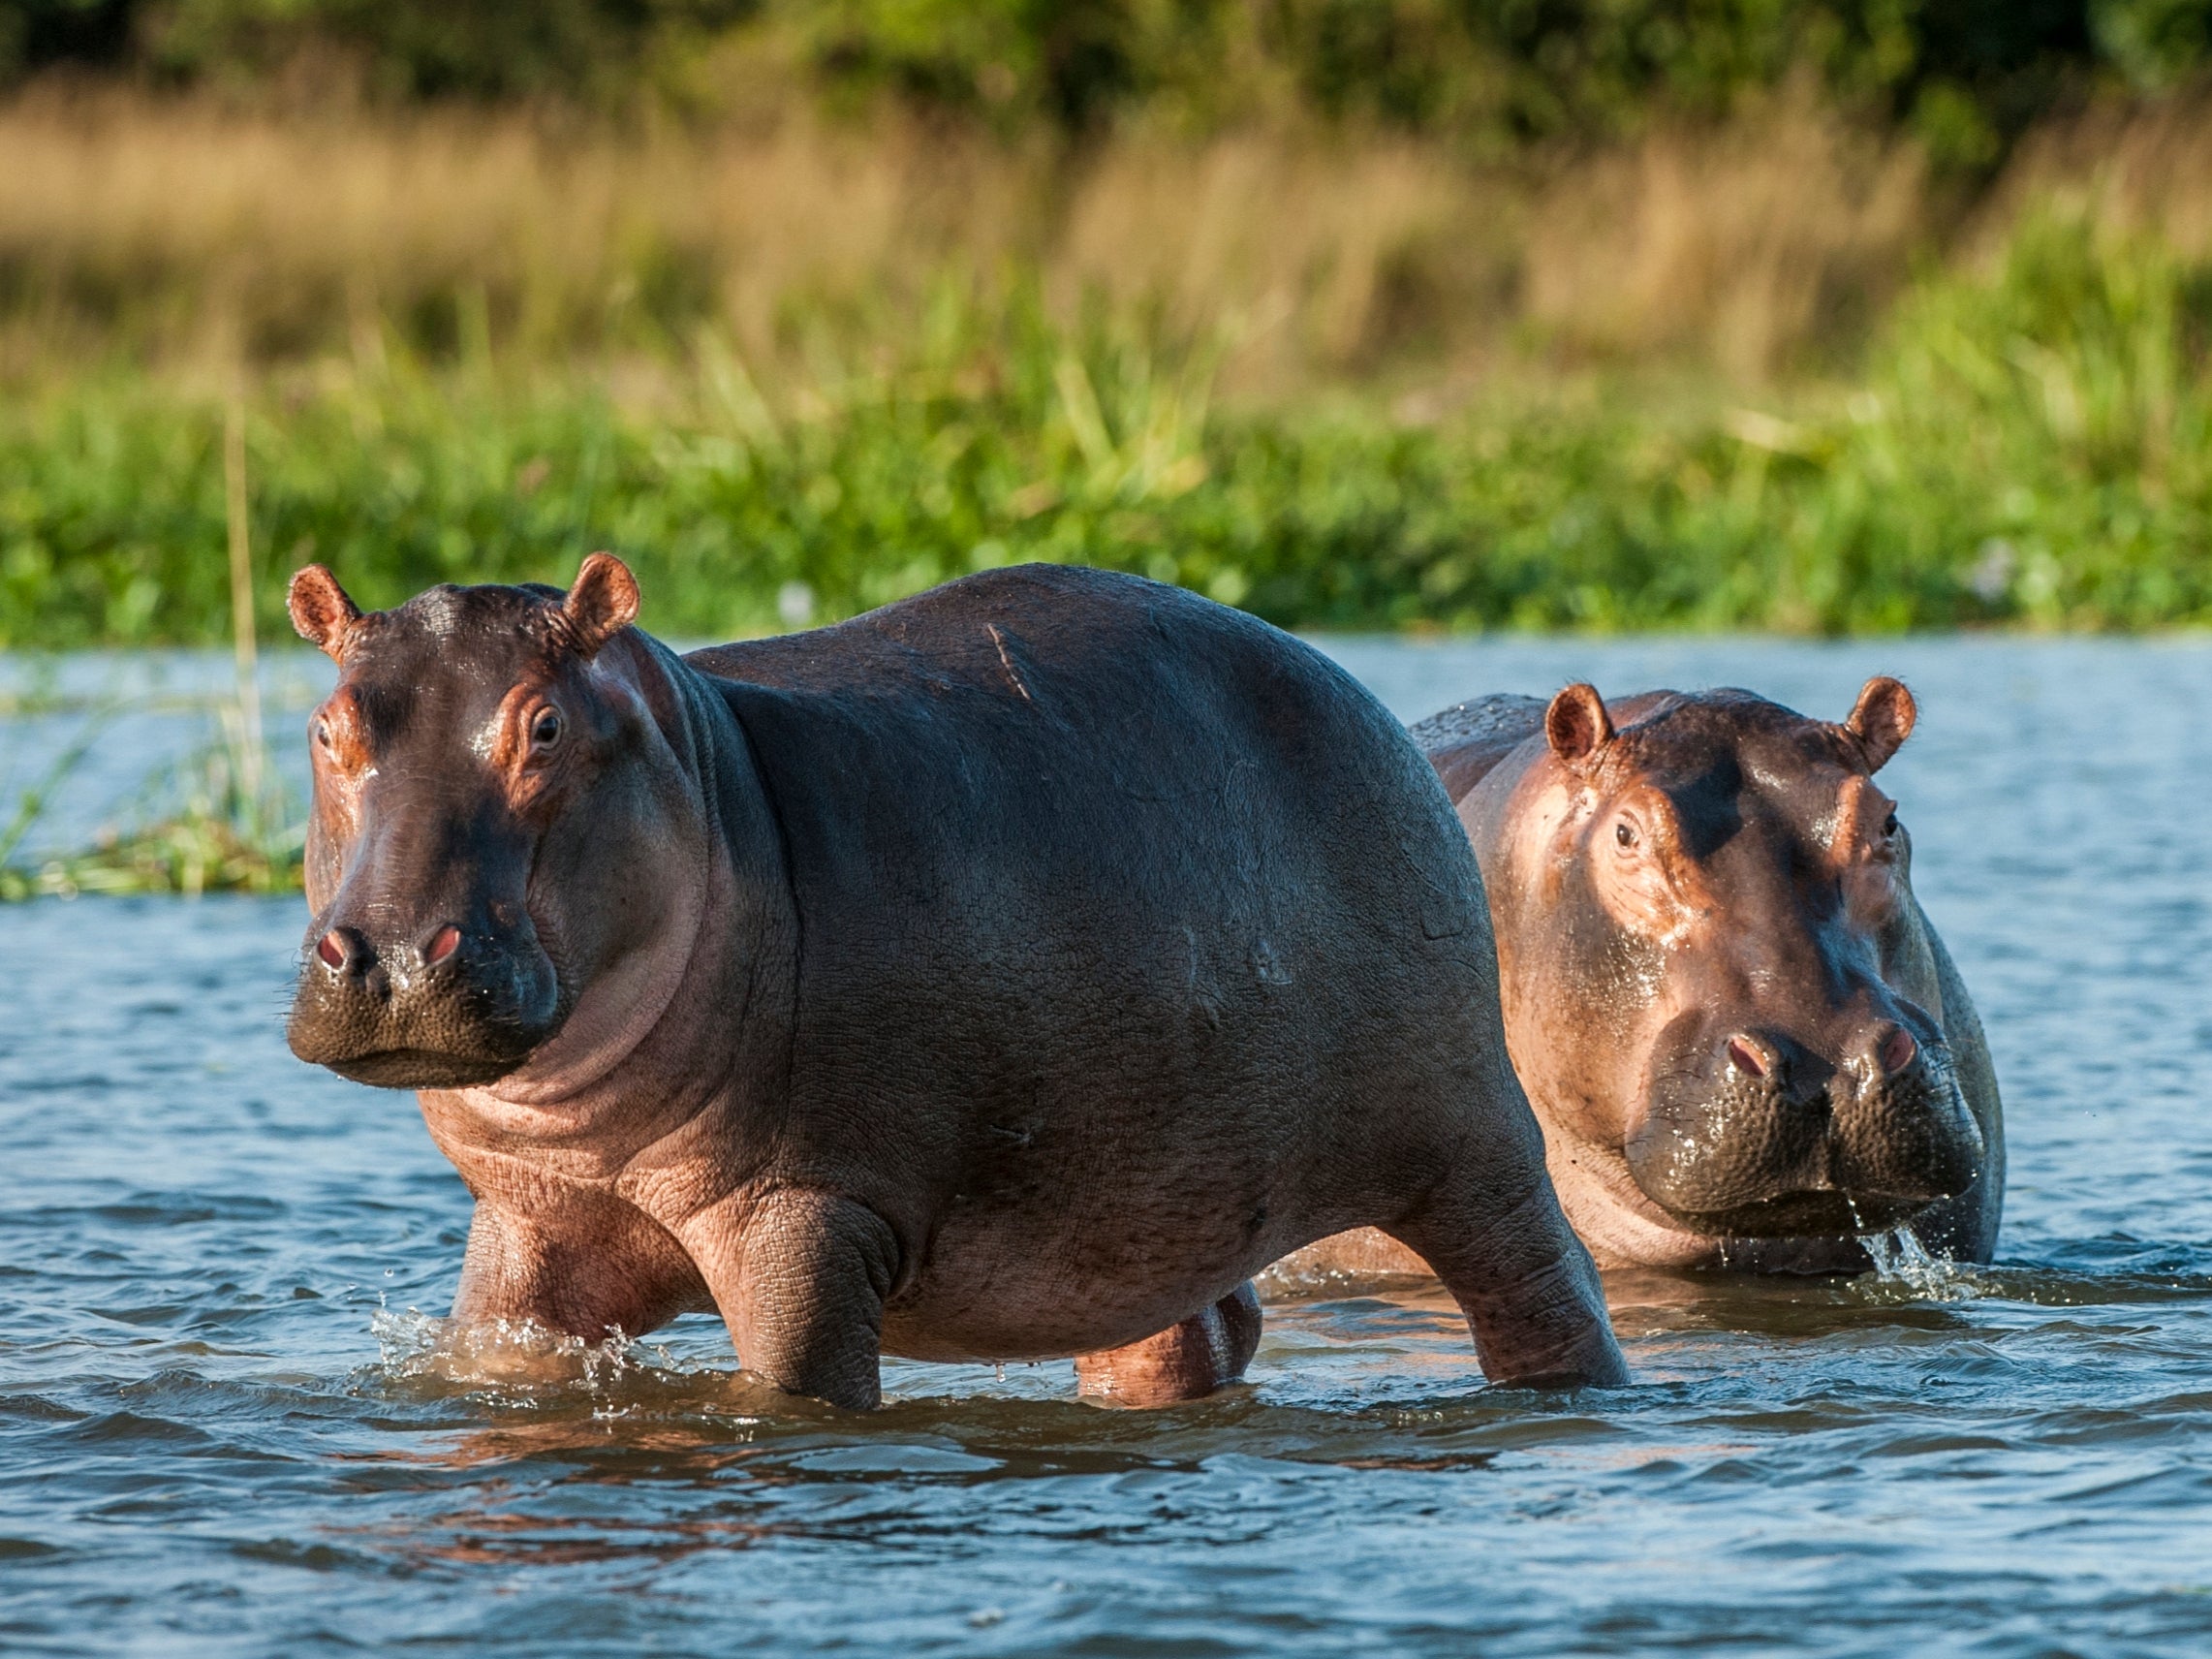 The hippo had strayed nearly a kilometre from one of Africa’s great lakes, according to police